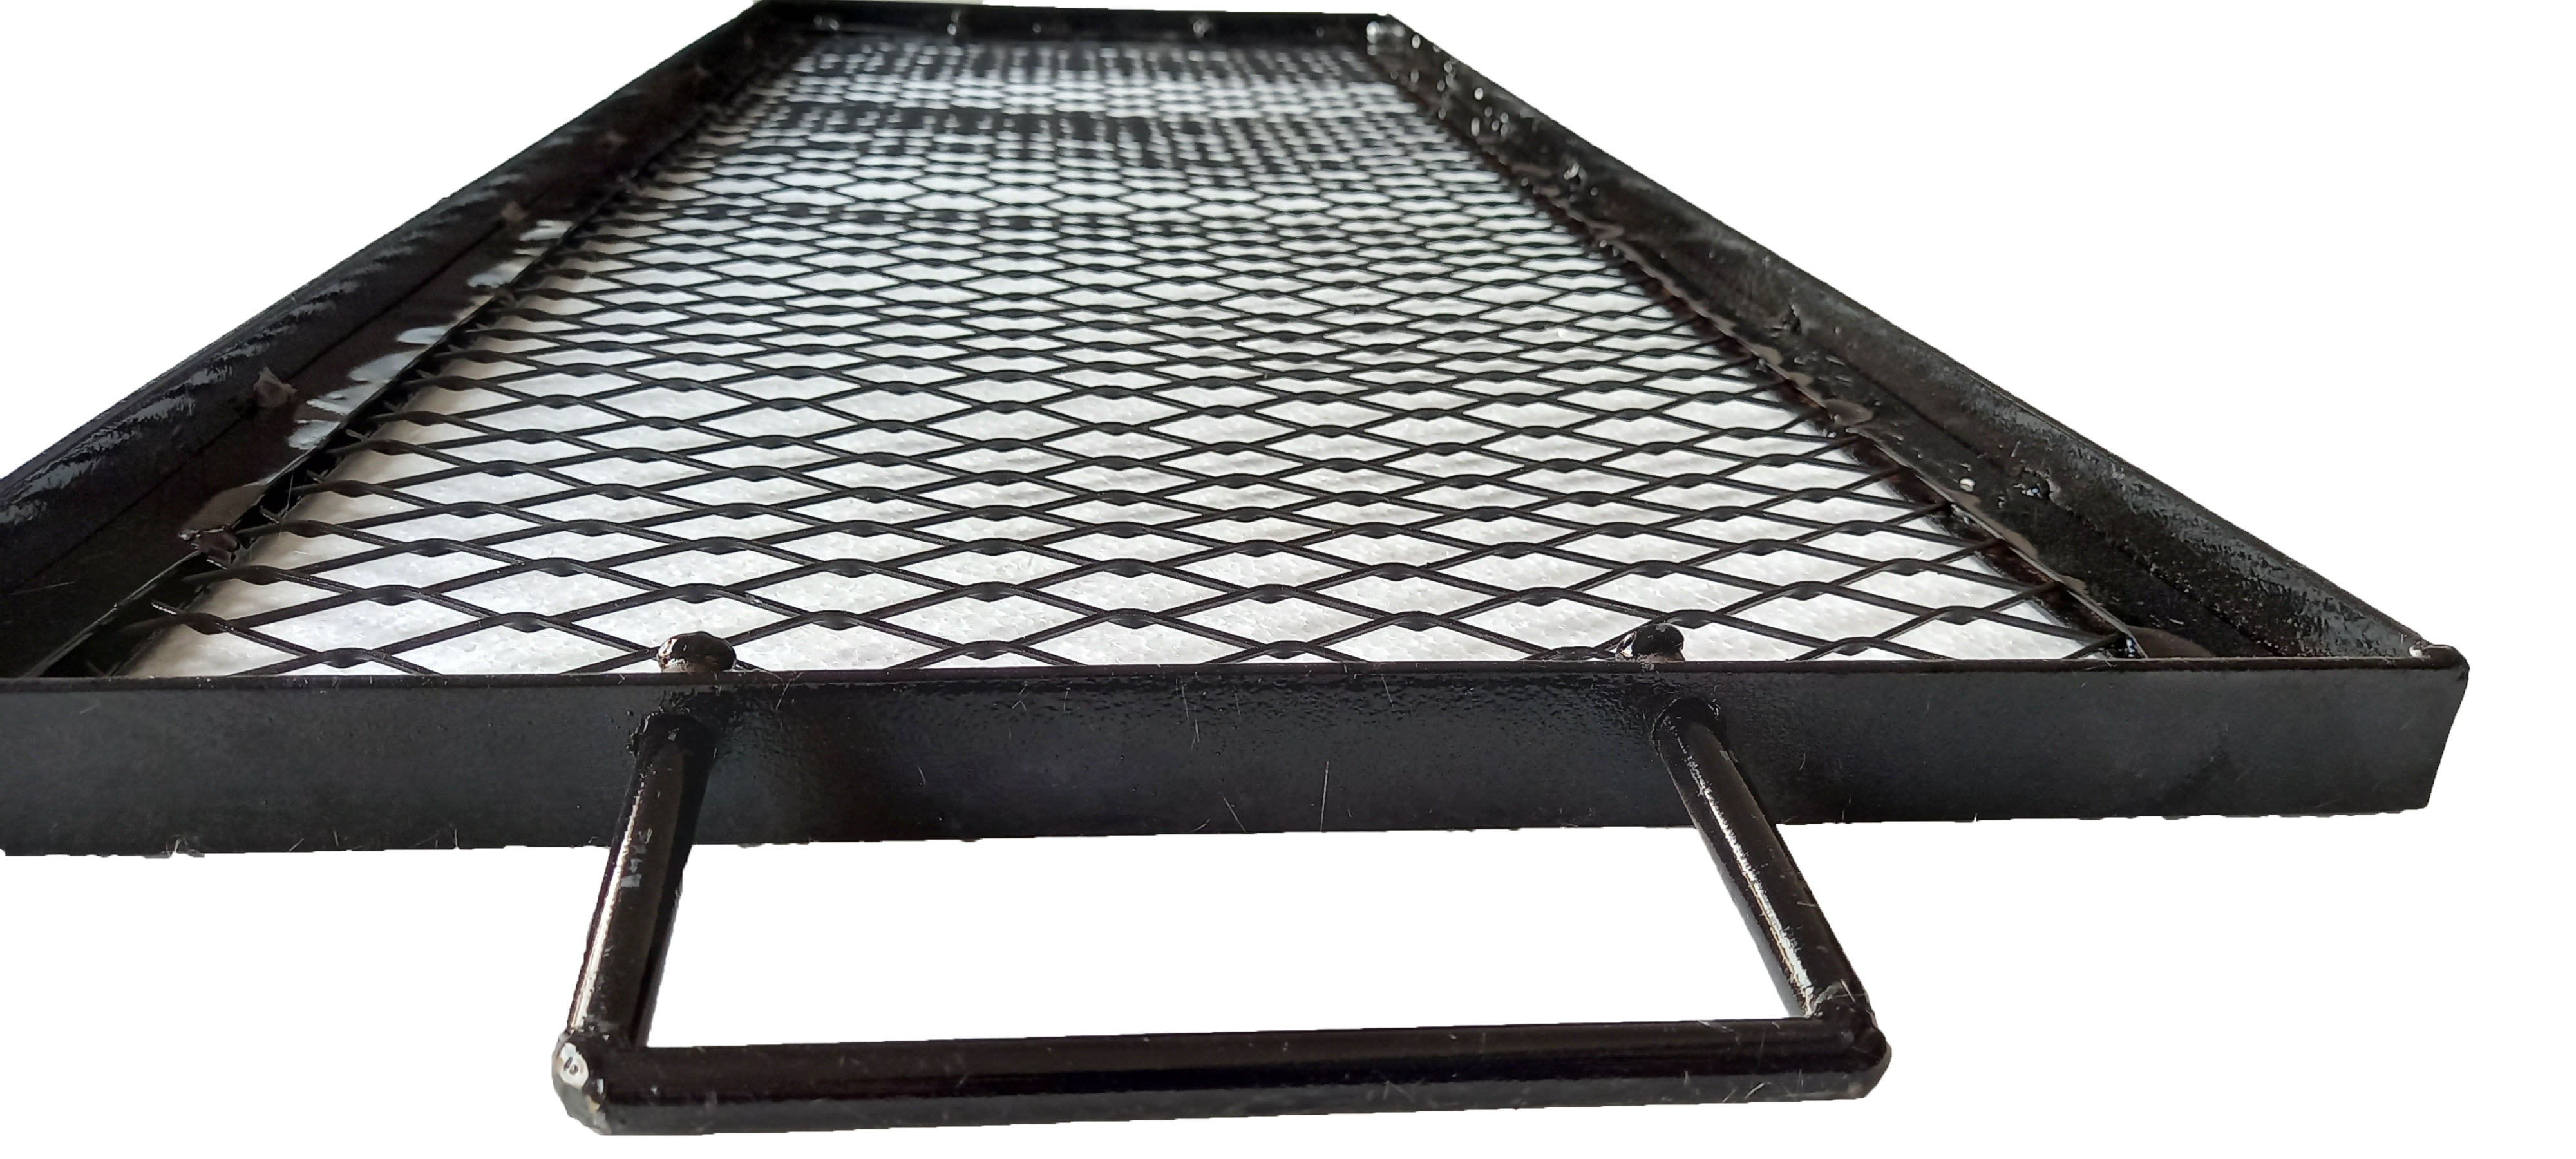 40 X15 Rectangle Cooking Grate X Marks, Square Fire Pit Insert With Cooking Grate